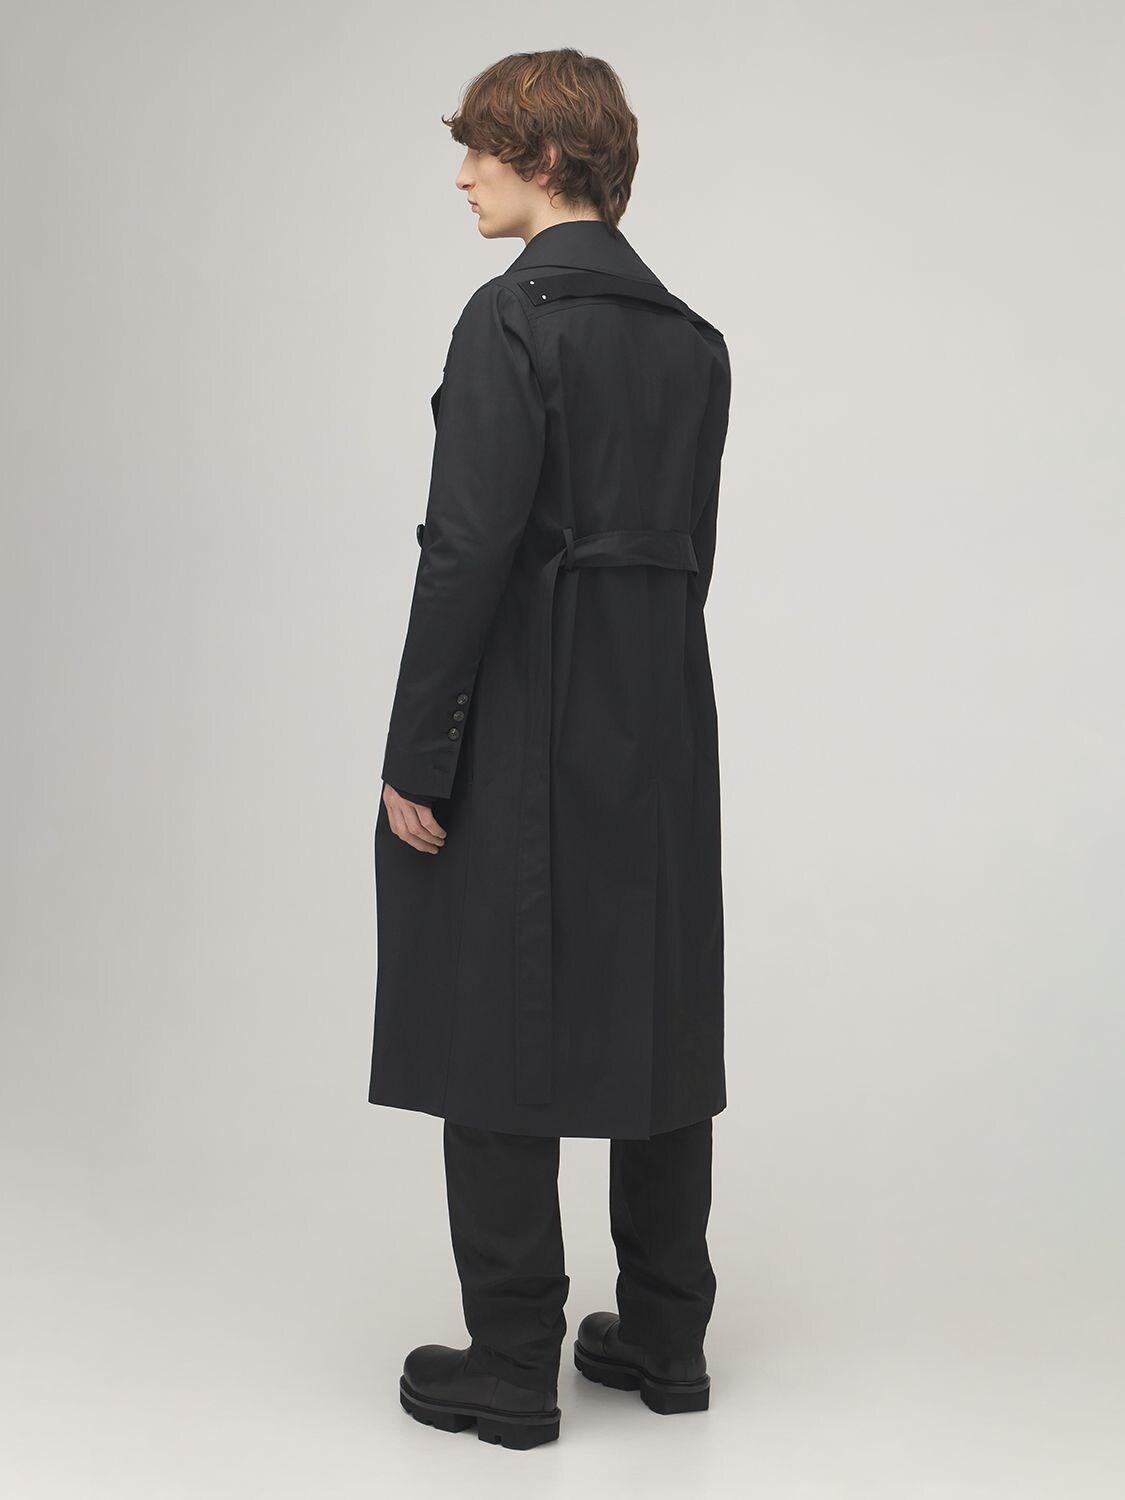 Rick Owens Performa Cotton Trench Coat in Black for Men - Lyst